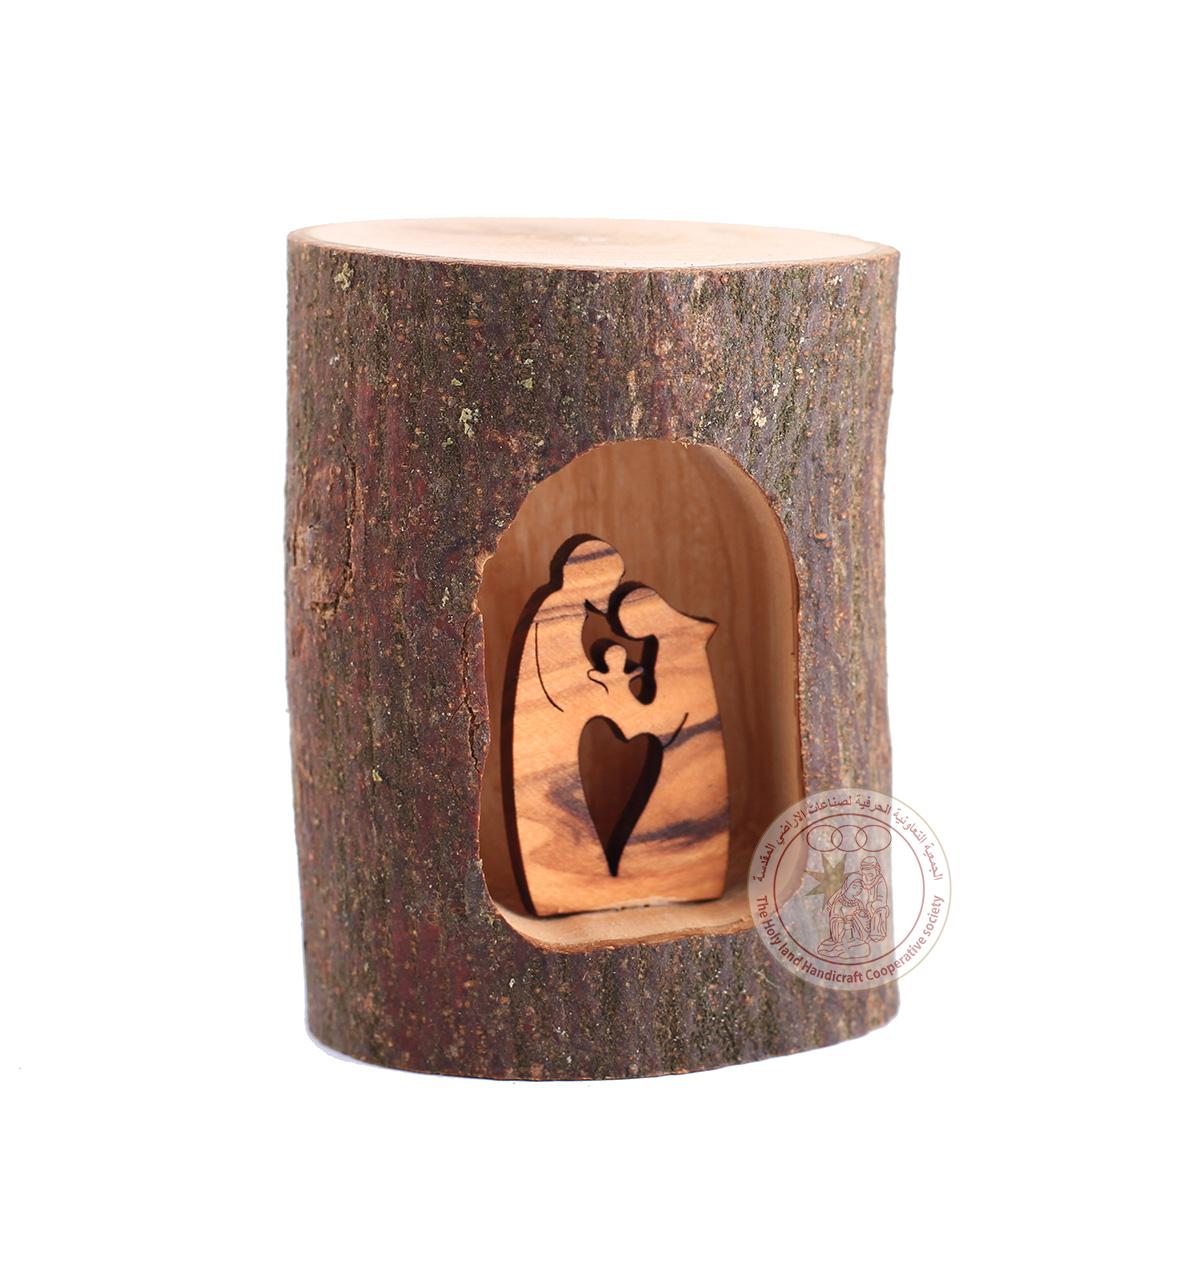 Holy Family in Grotto - Version 1, Olive Wood Trunk Inlay